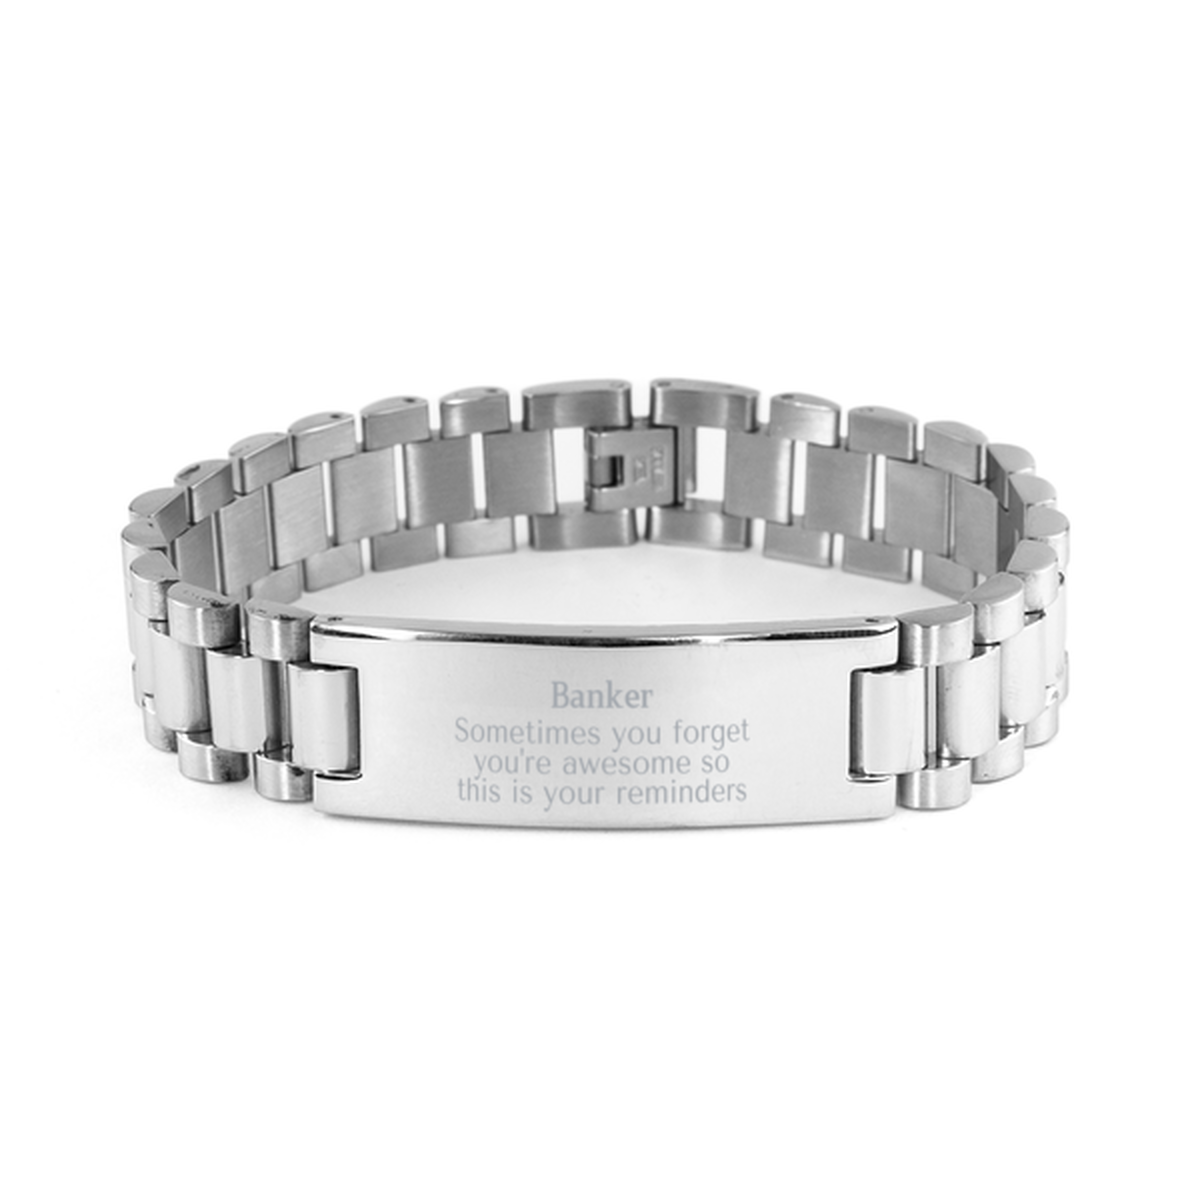 Sentimental Banker Ladder Stainless Steel Bracelet, Banker Sometimes you forget you're awesome so this is your reminders, Graduation Christmas Birthday Gifts for Banker, Men, Women, Coworkers